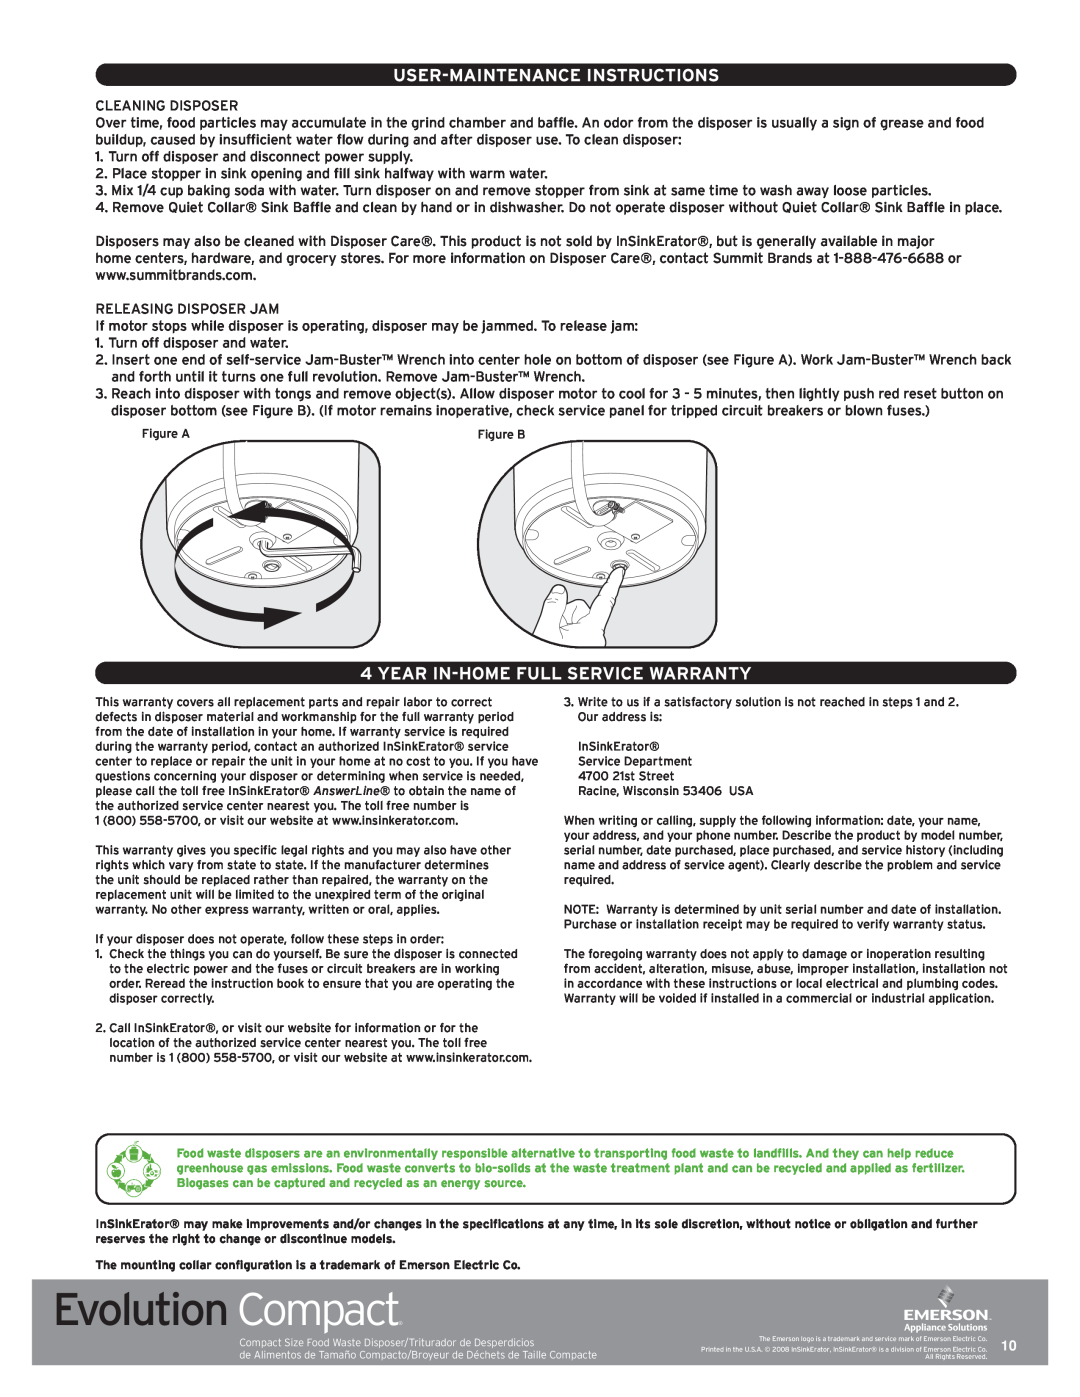 InSinkErator Evolution Compact manual User-Maintenance Instructions, Year In-Home Full Service Warranty 